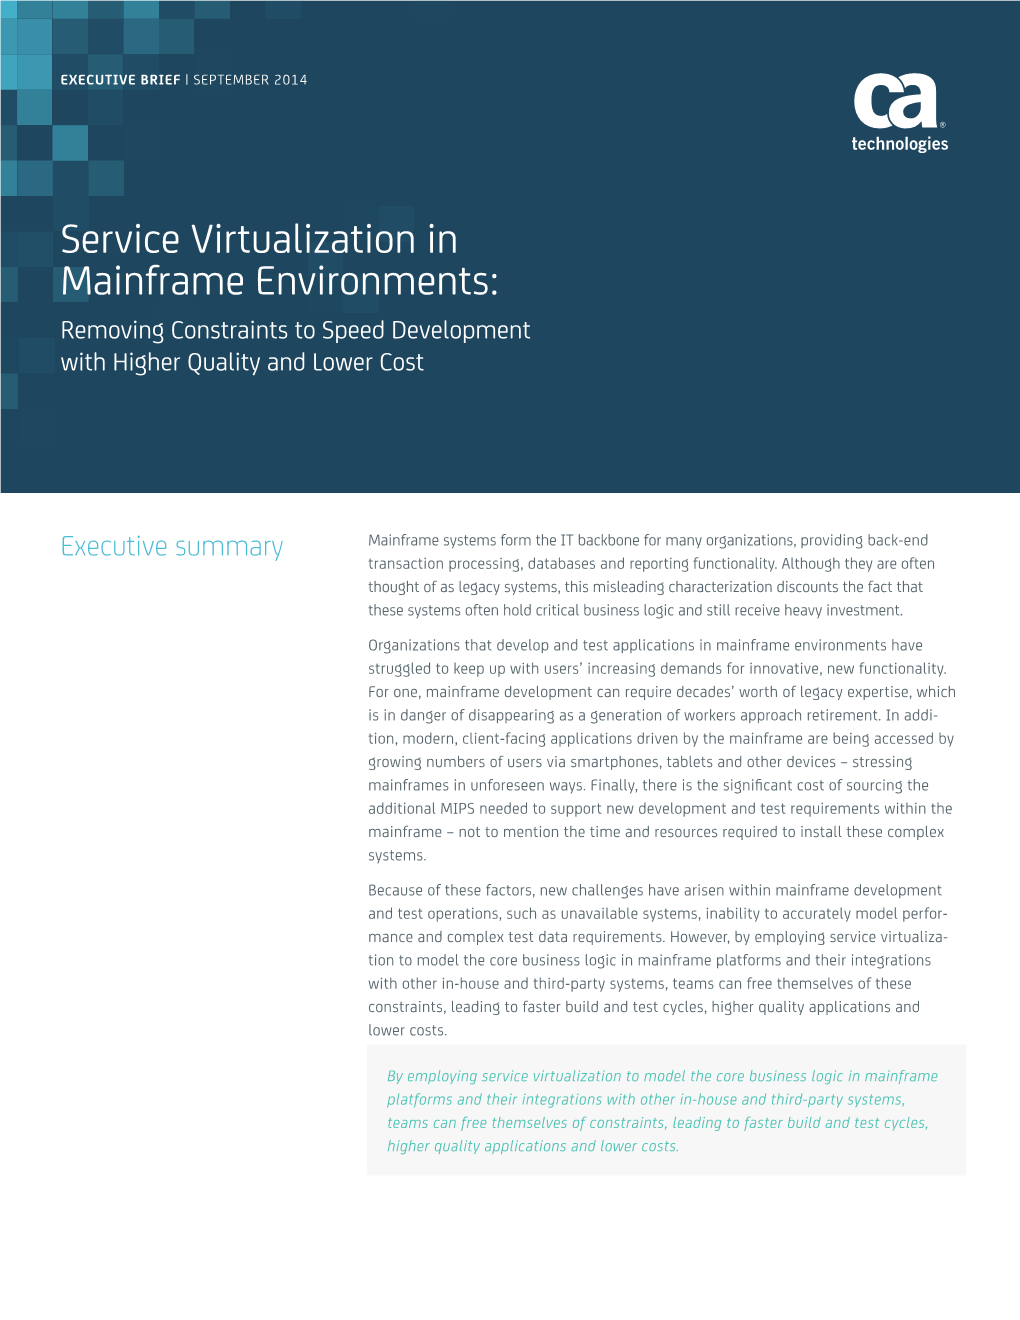 Service Virtualization in Mainframe Environments: Removing Constraints to Speed Development with Higher Quality and Lower Cost